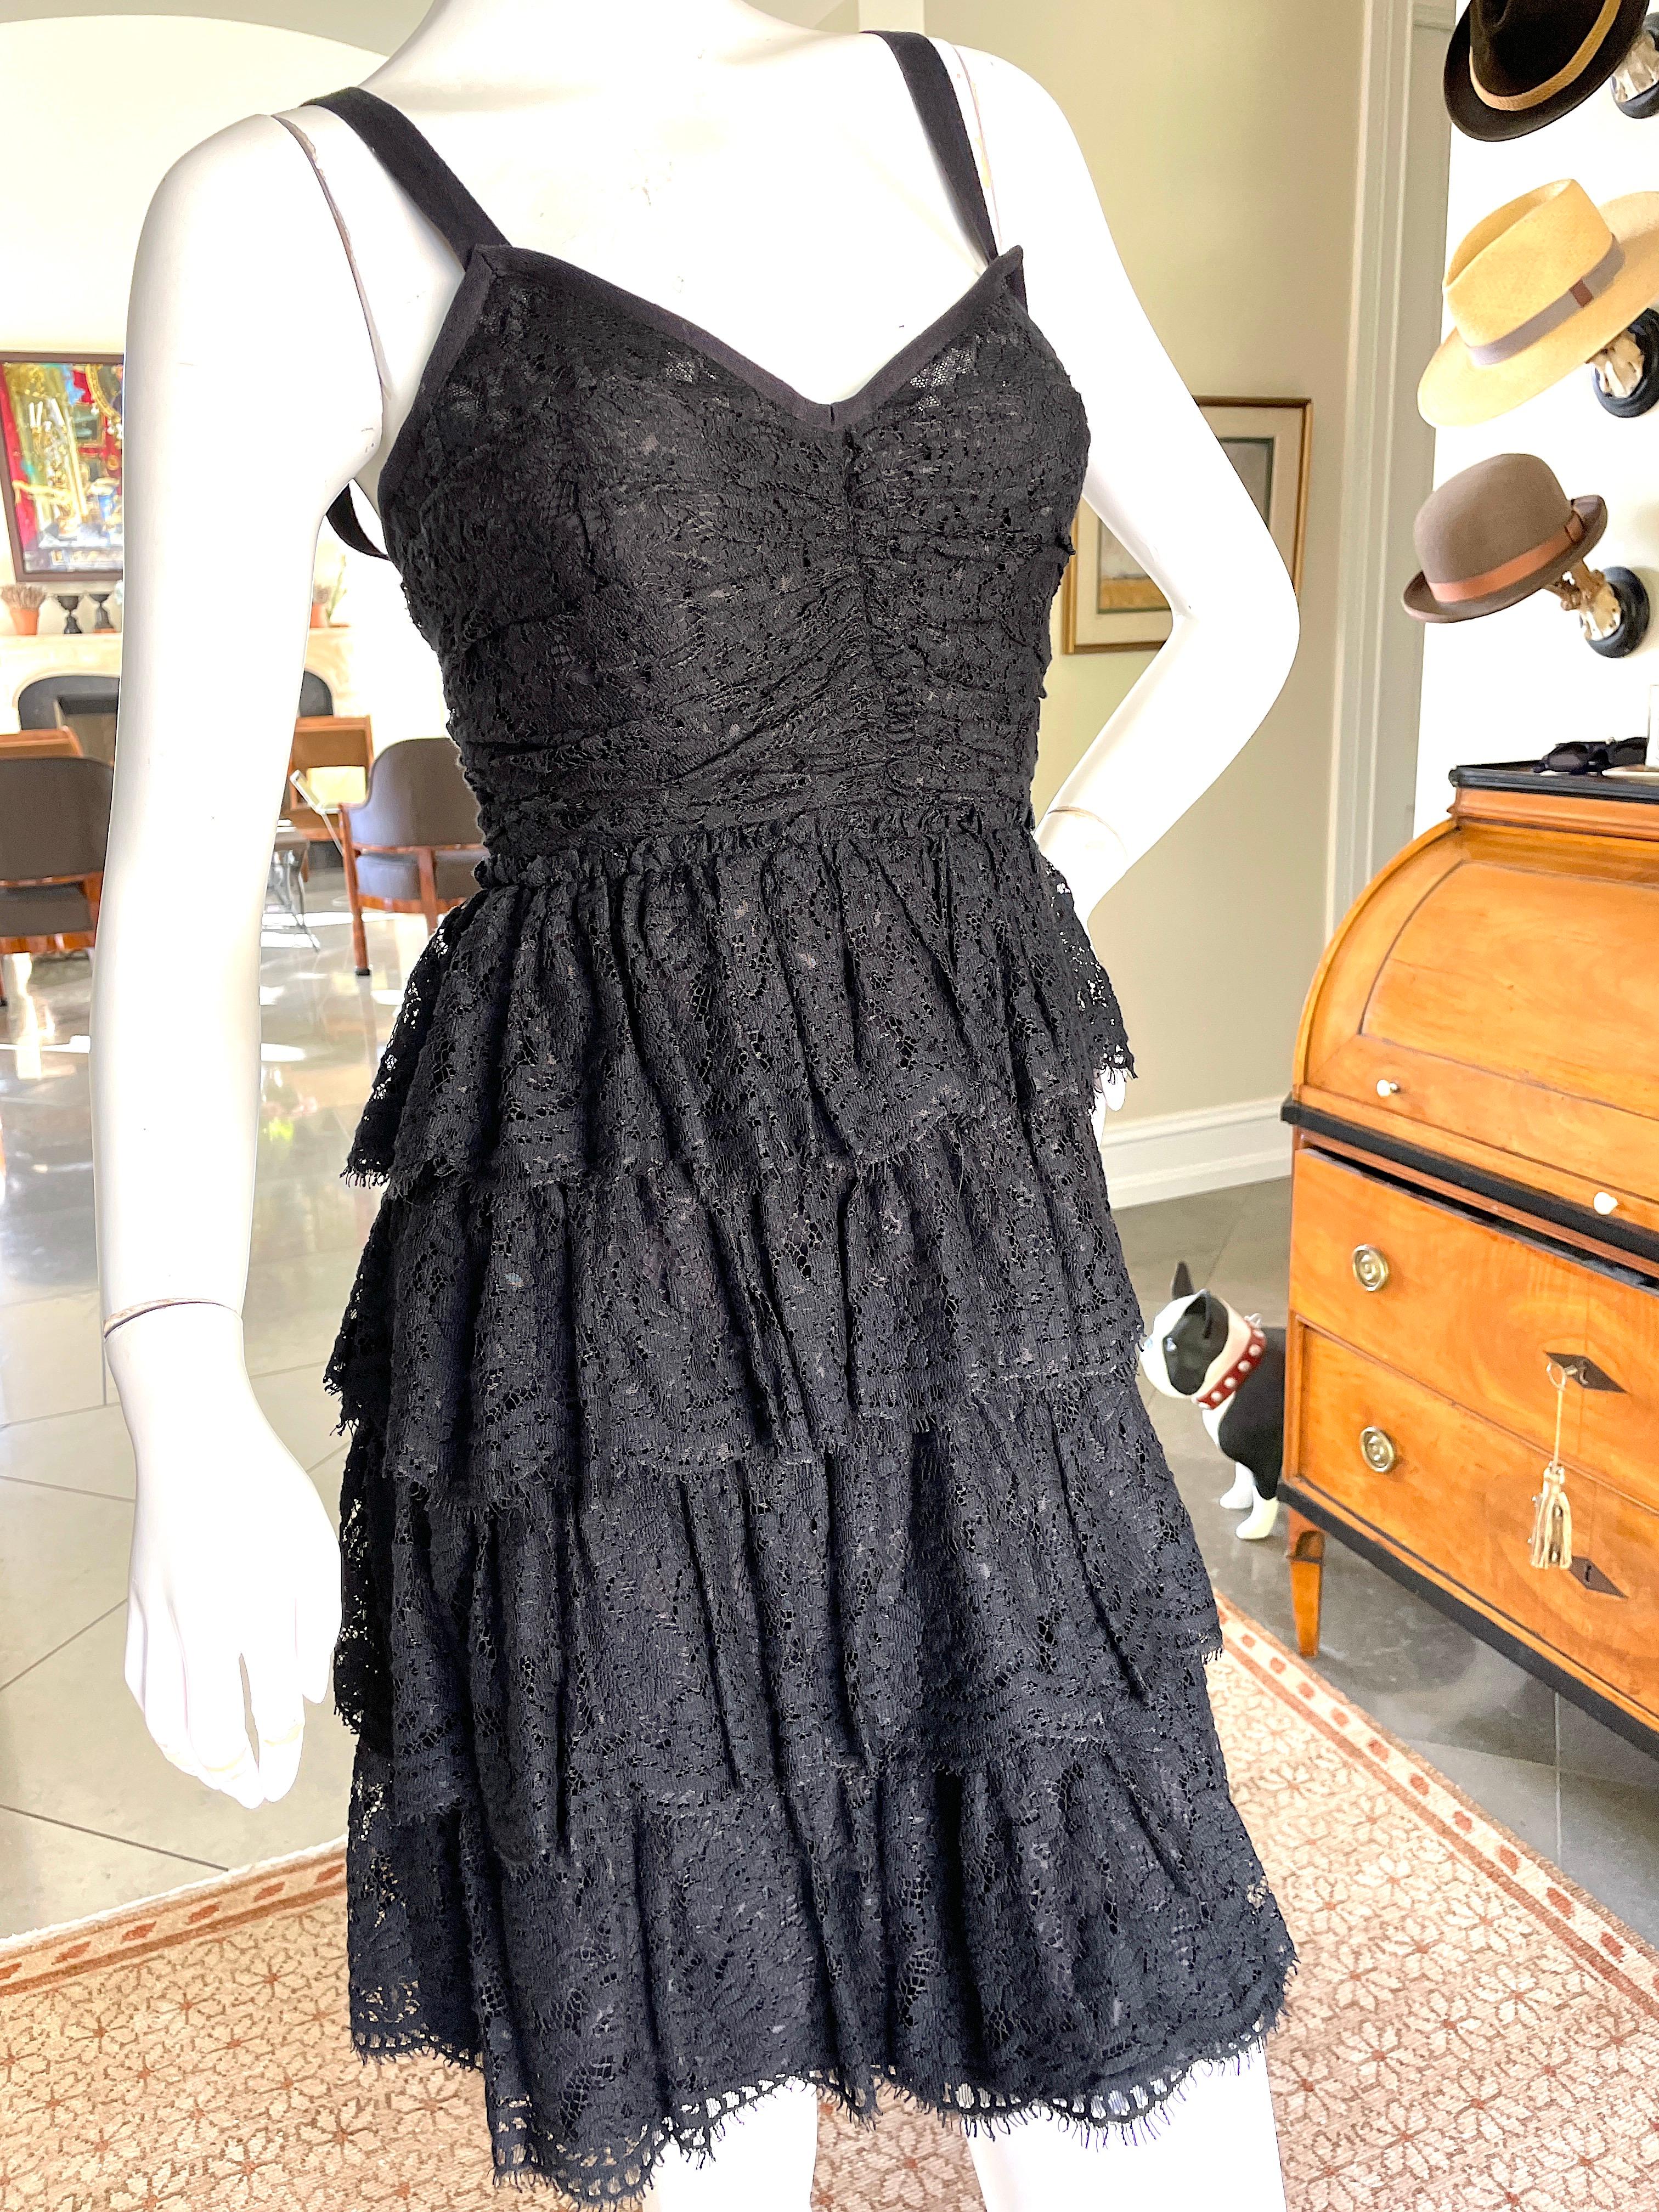 D&G by Dolce & Gabbana Vintage Black Lace Tiered Cocktail Dress    For Sale 3